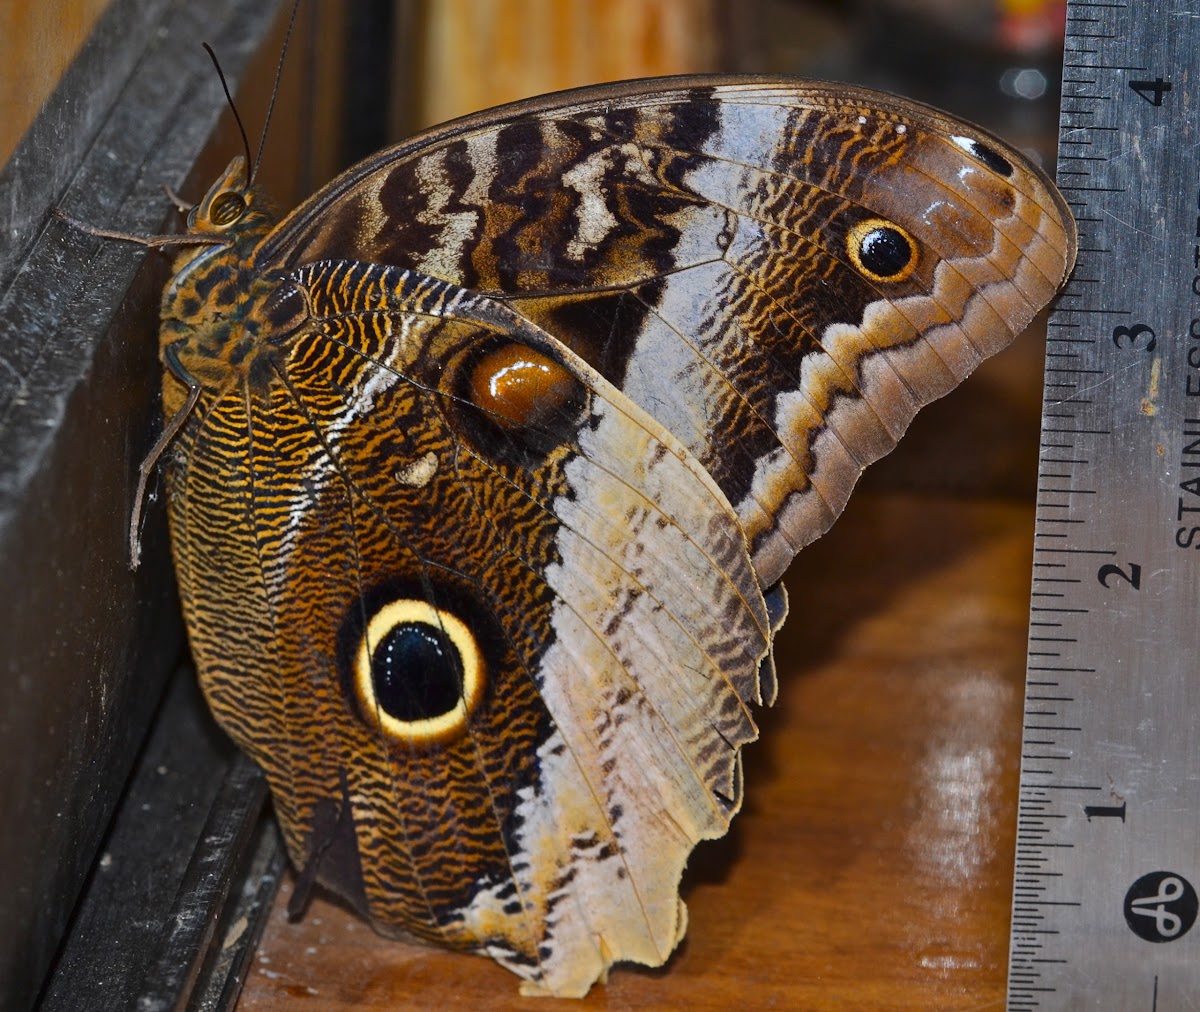 Banded-Owl Butterfly